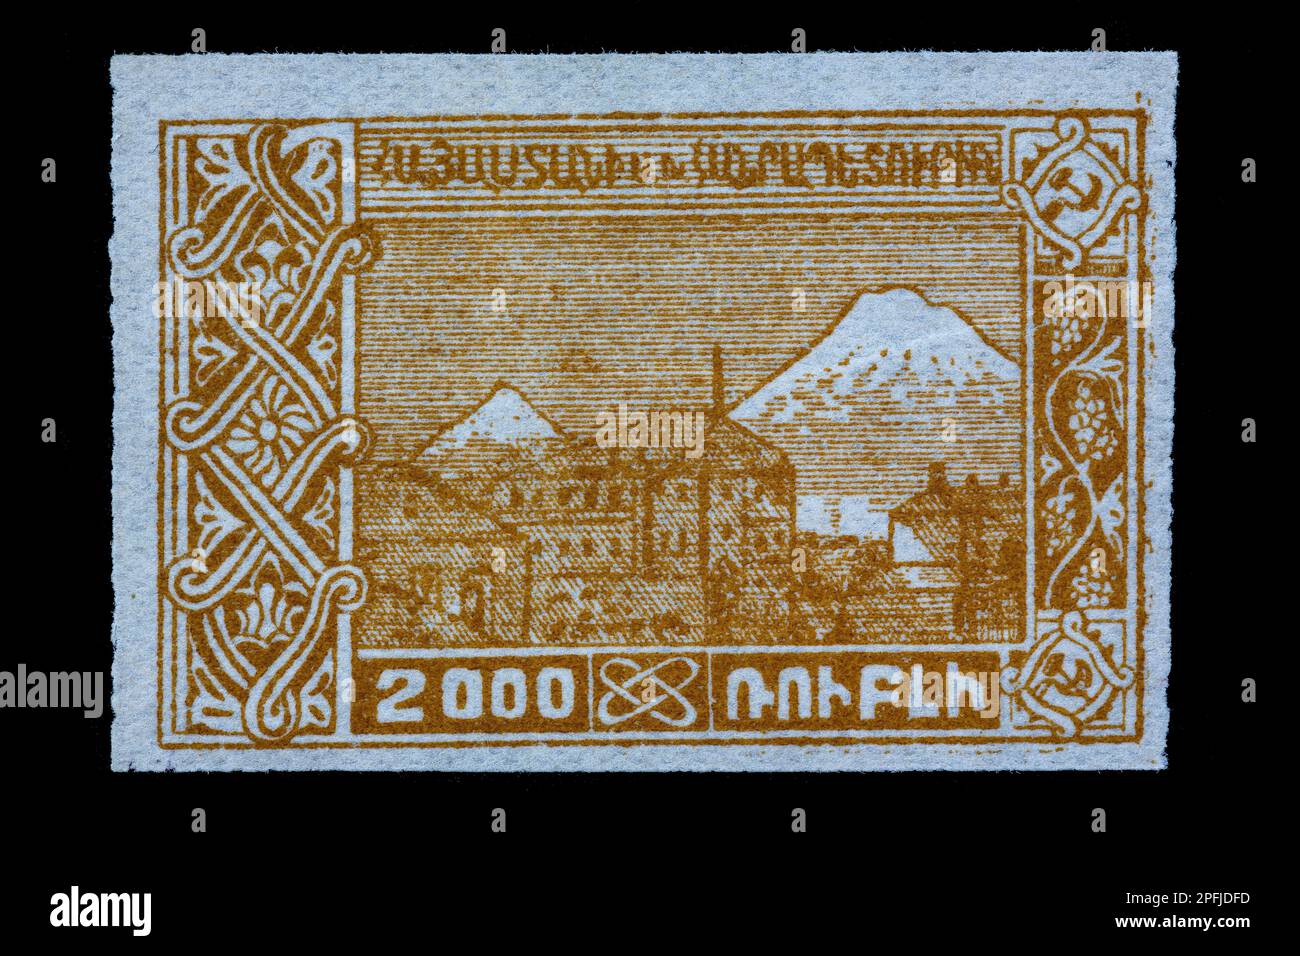 Early postage stamp from Armenia. Created but never issued in 1921. Industrial scene with snowy mountains. Face value 2000 Roubles. Stock Photo